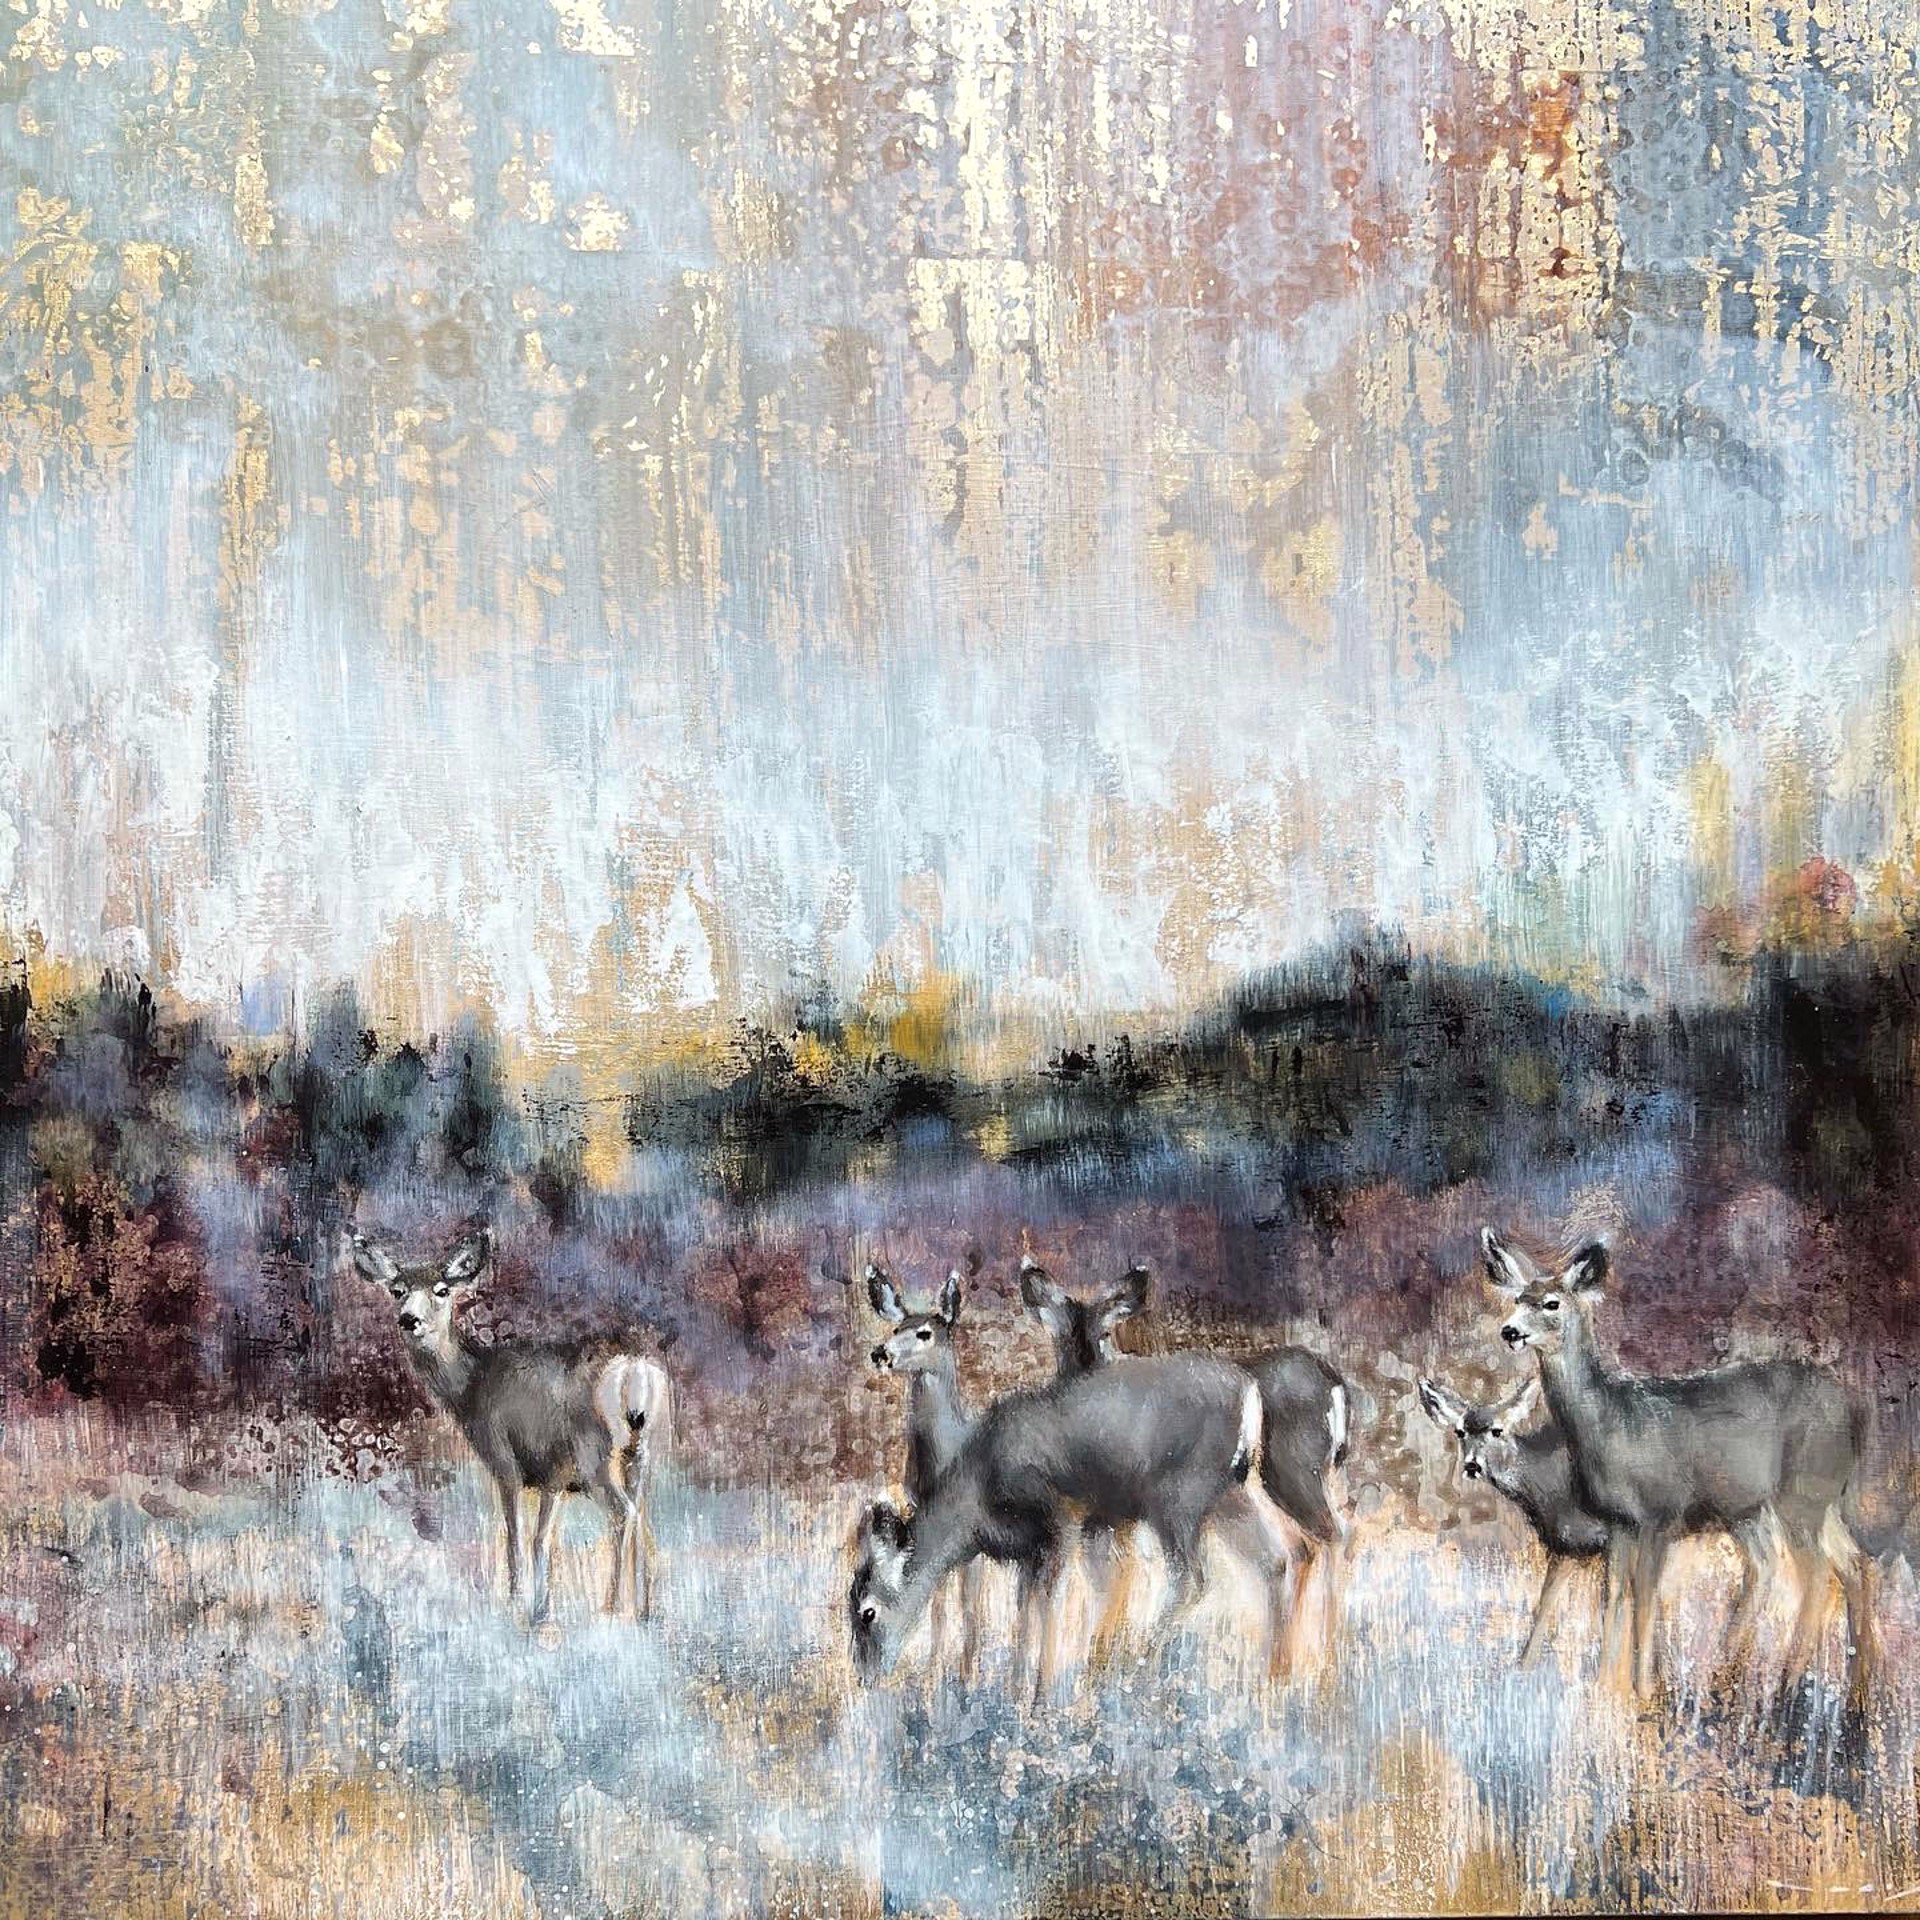 Original Acrylic Painting By Nealy Riley Featuring A Herd Of Deer Over Abstracted Landscape Background With Gold Leaf Details